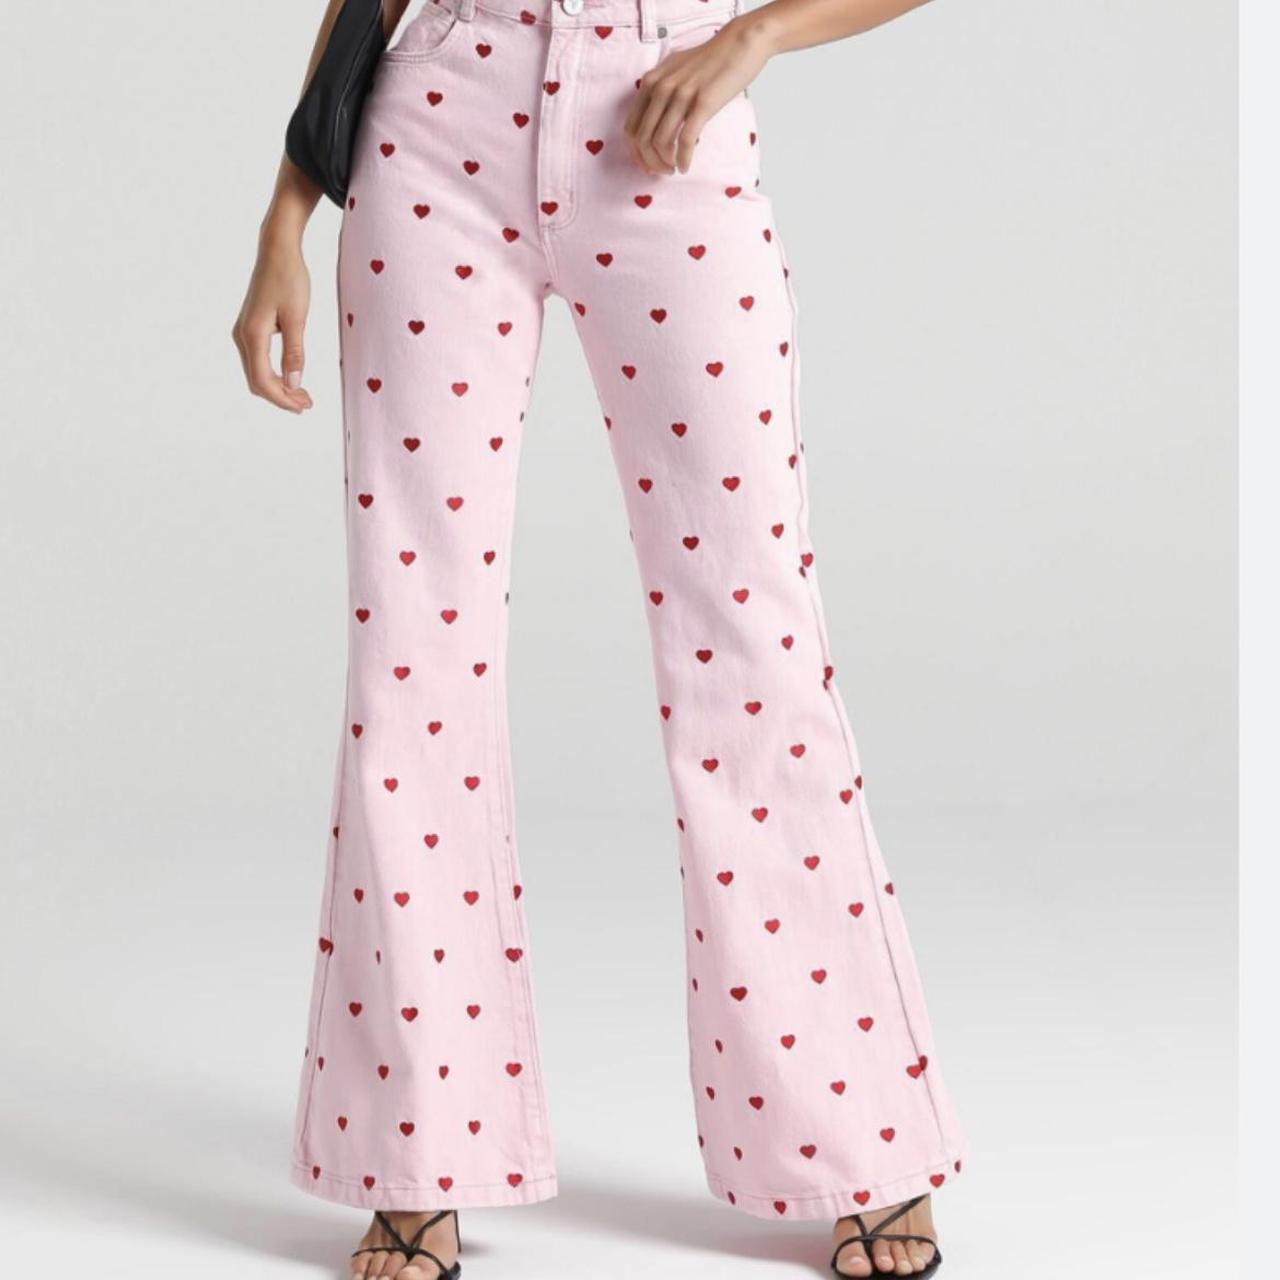 Abrand x Dyspnea A Double Oh Flare Pants Pink Heart $